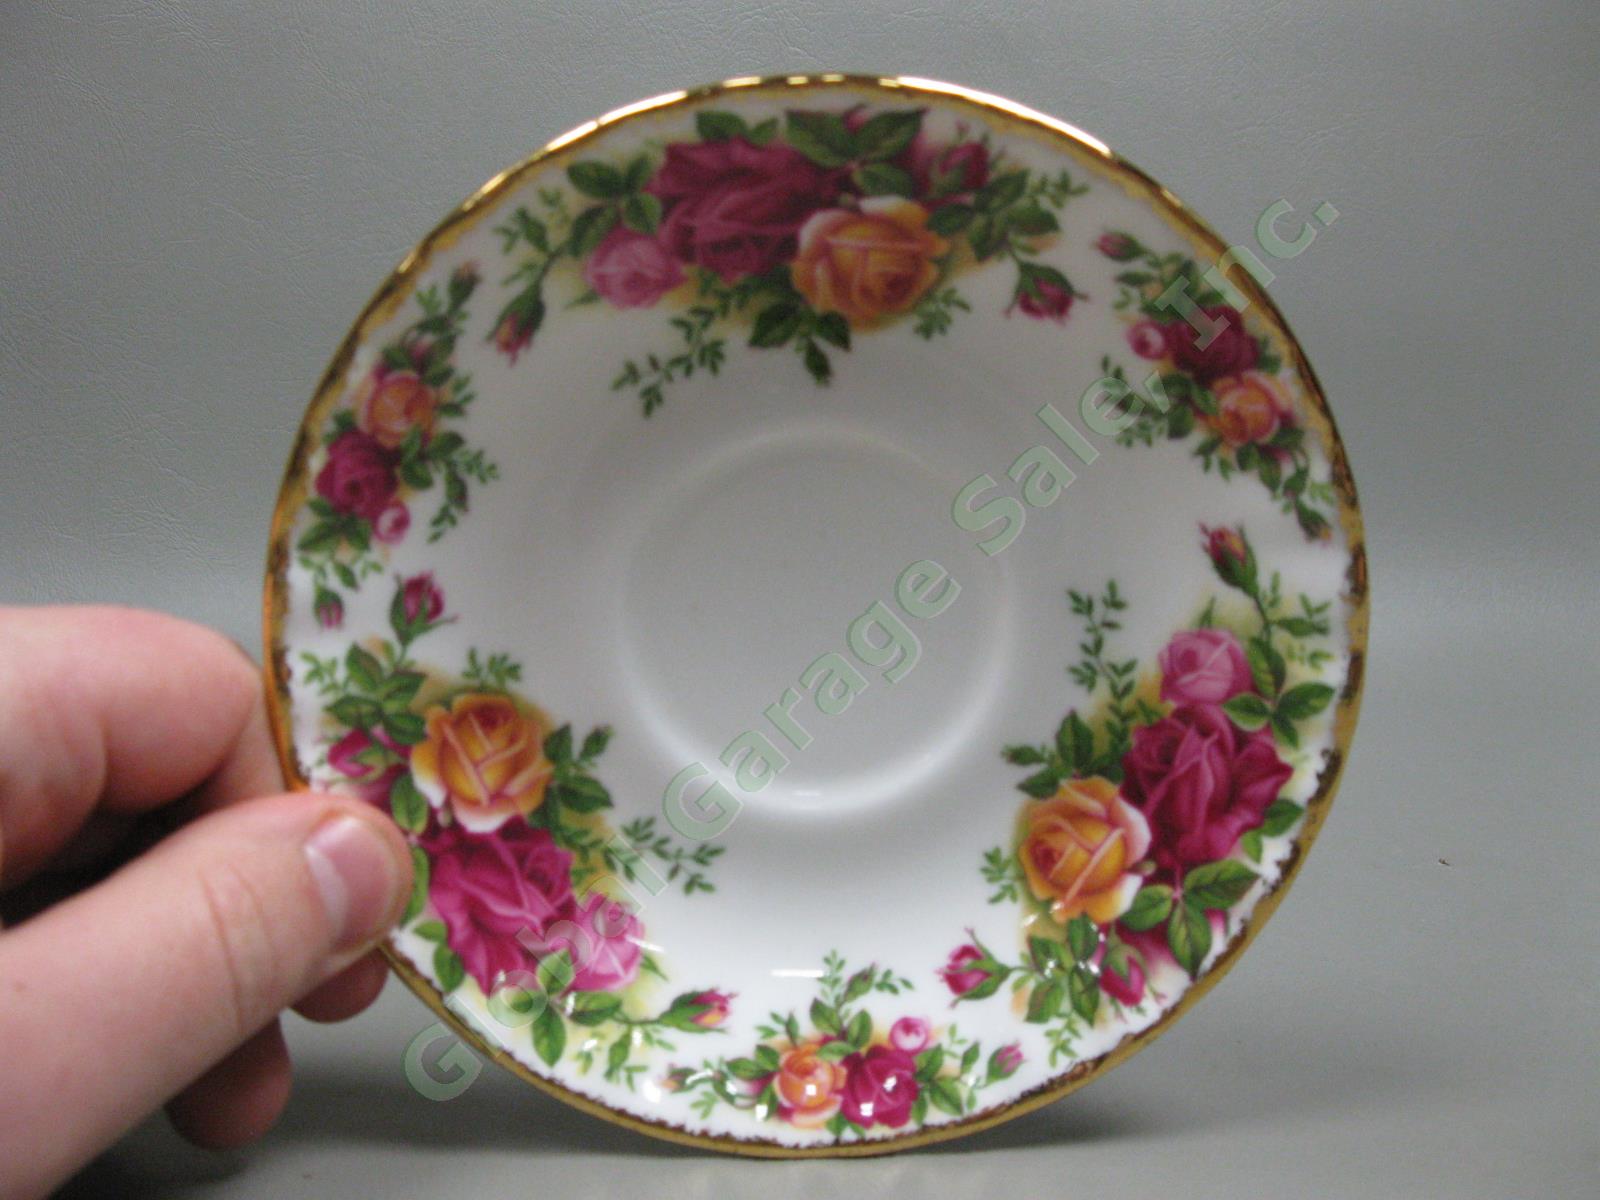 8 Royal Albert Old Country Roses Footed Tea Cup/Saucer Gold Trim Bone China Set 7